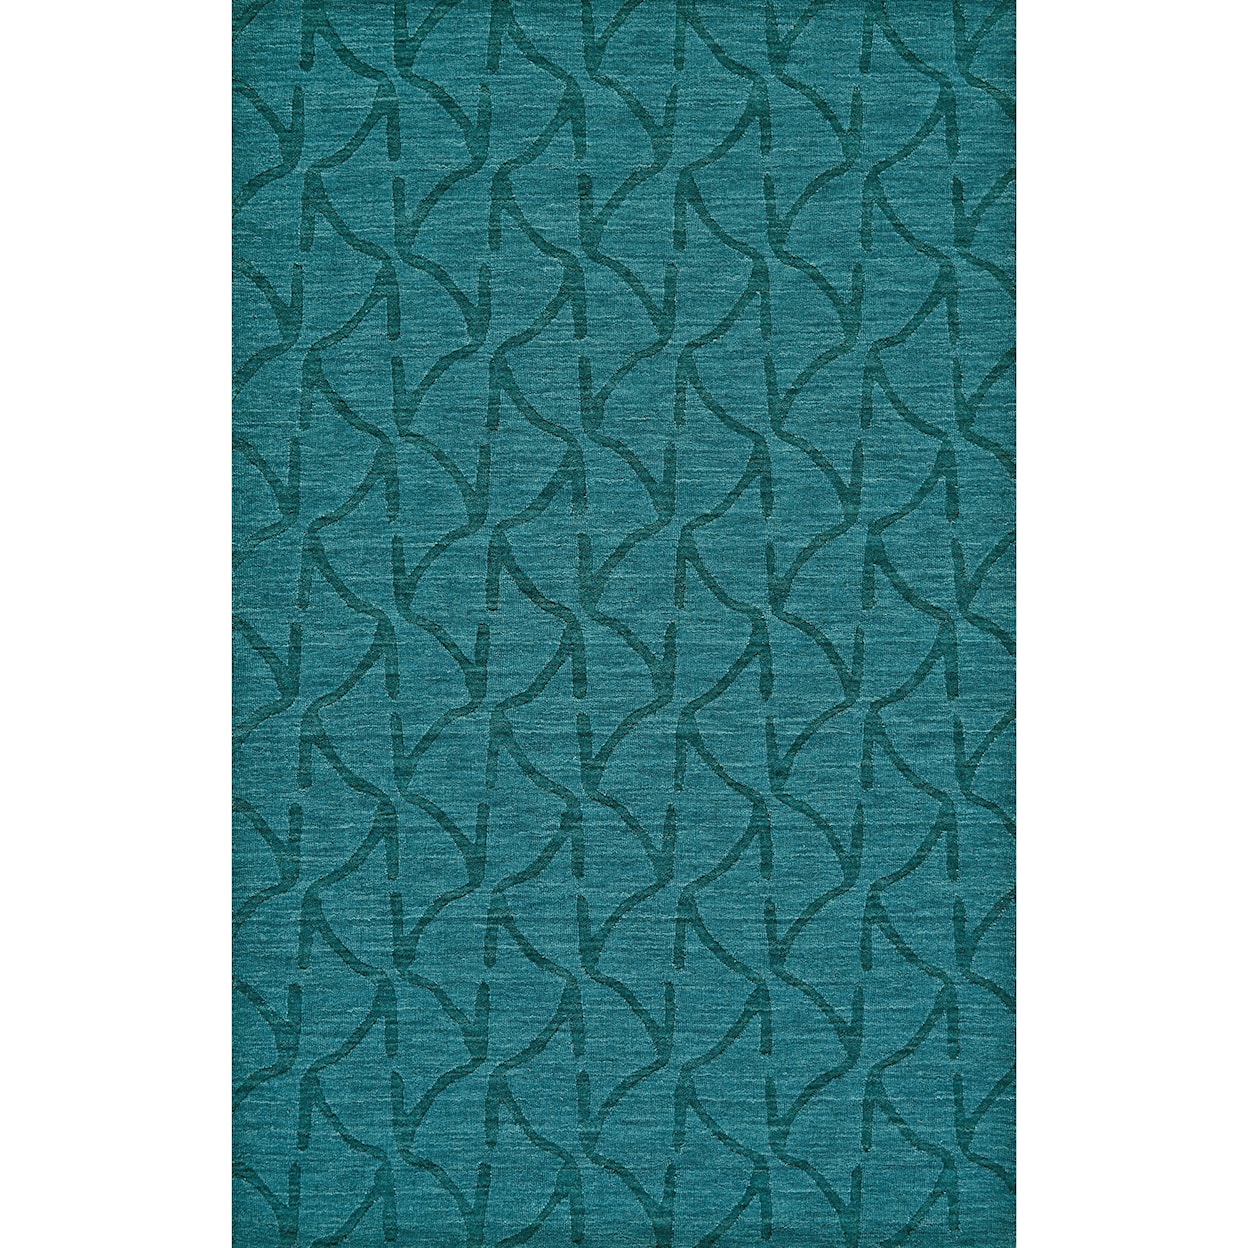 Feizy Rugs Soma Teal 9'-6" x 13'-6" Area Rug